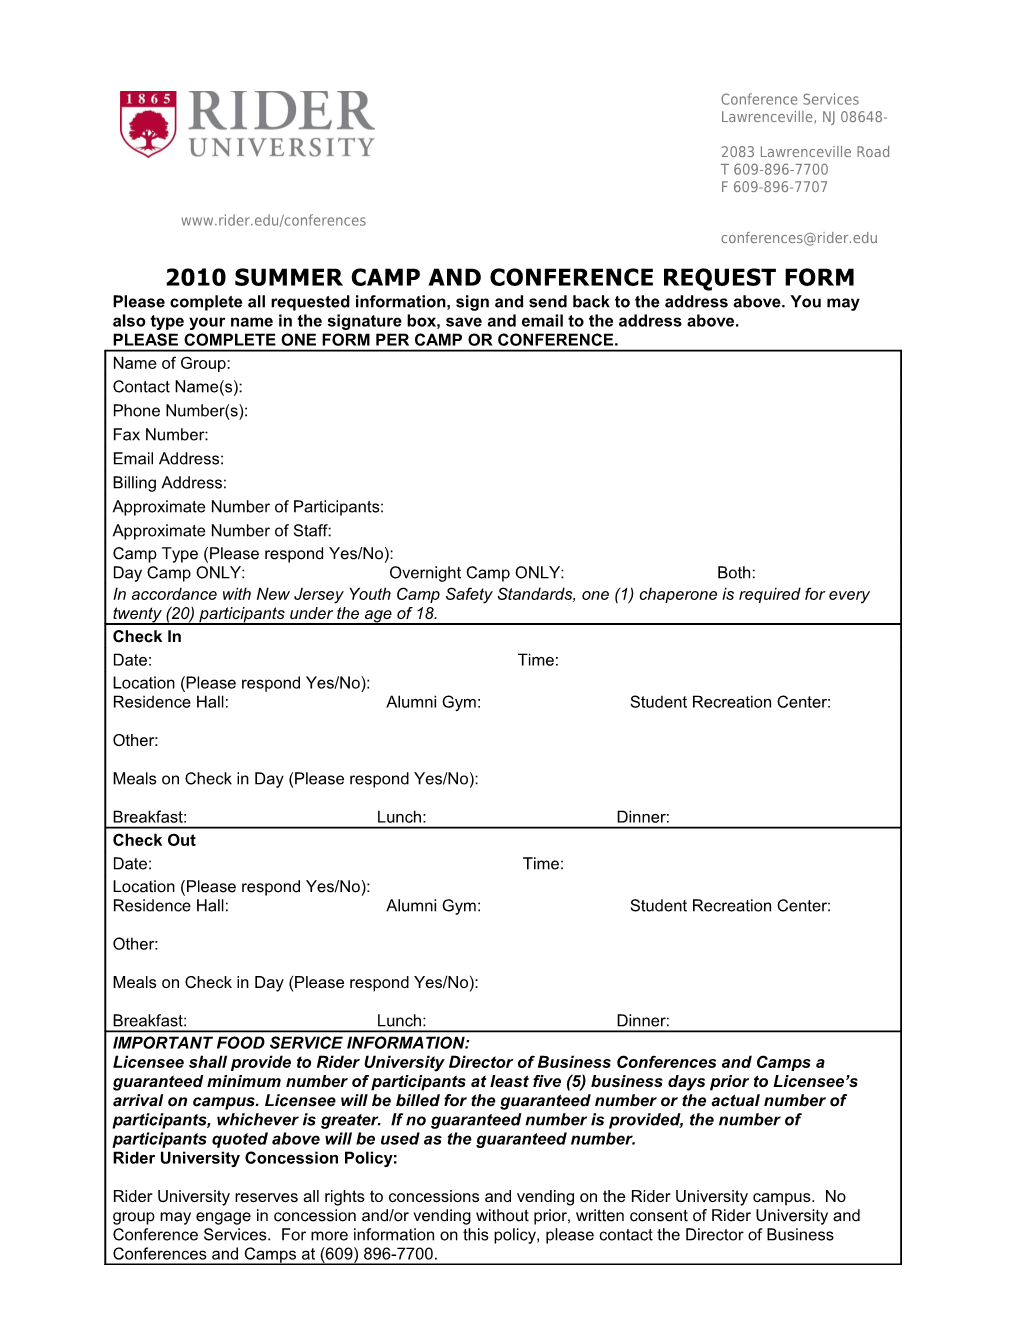 2010 Summer Camp and Conference Request FORM